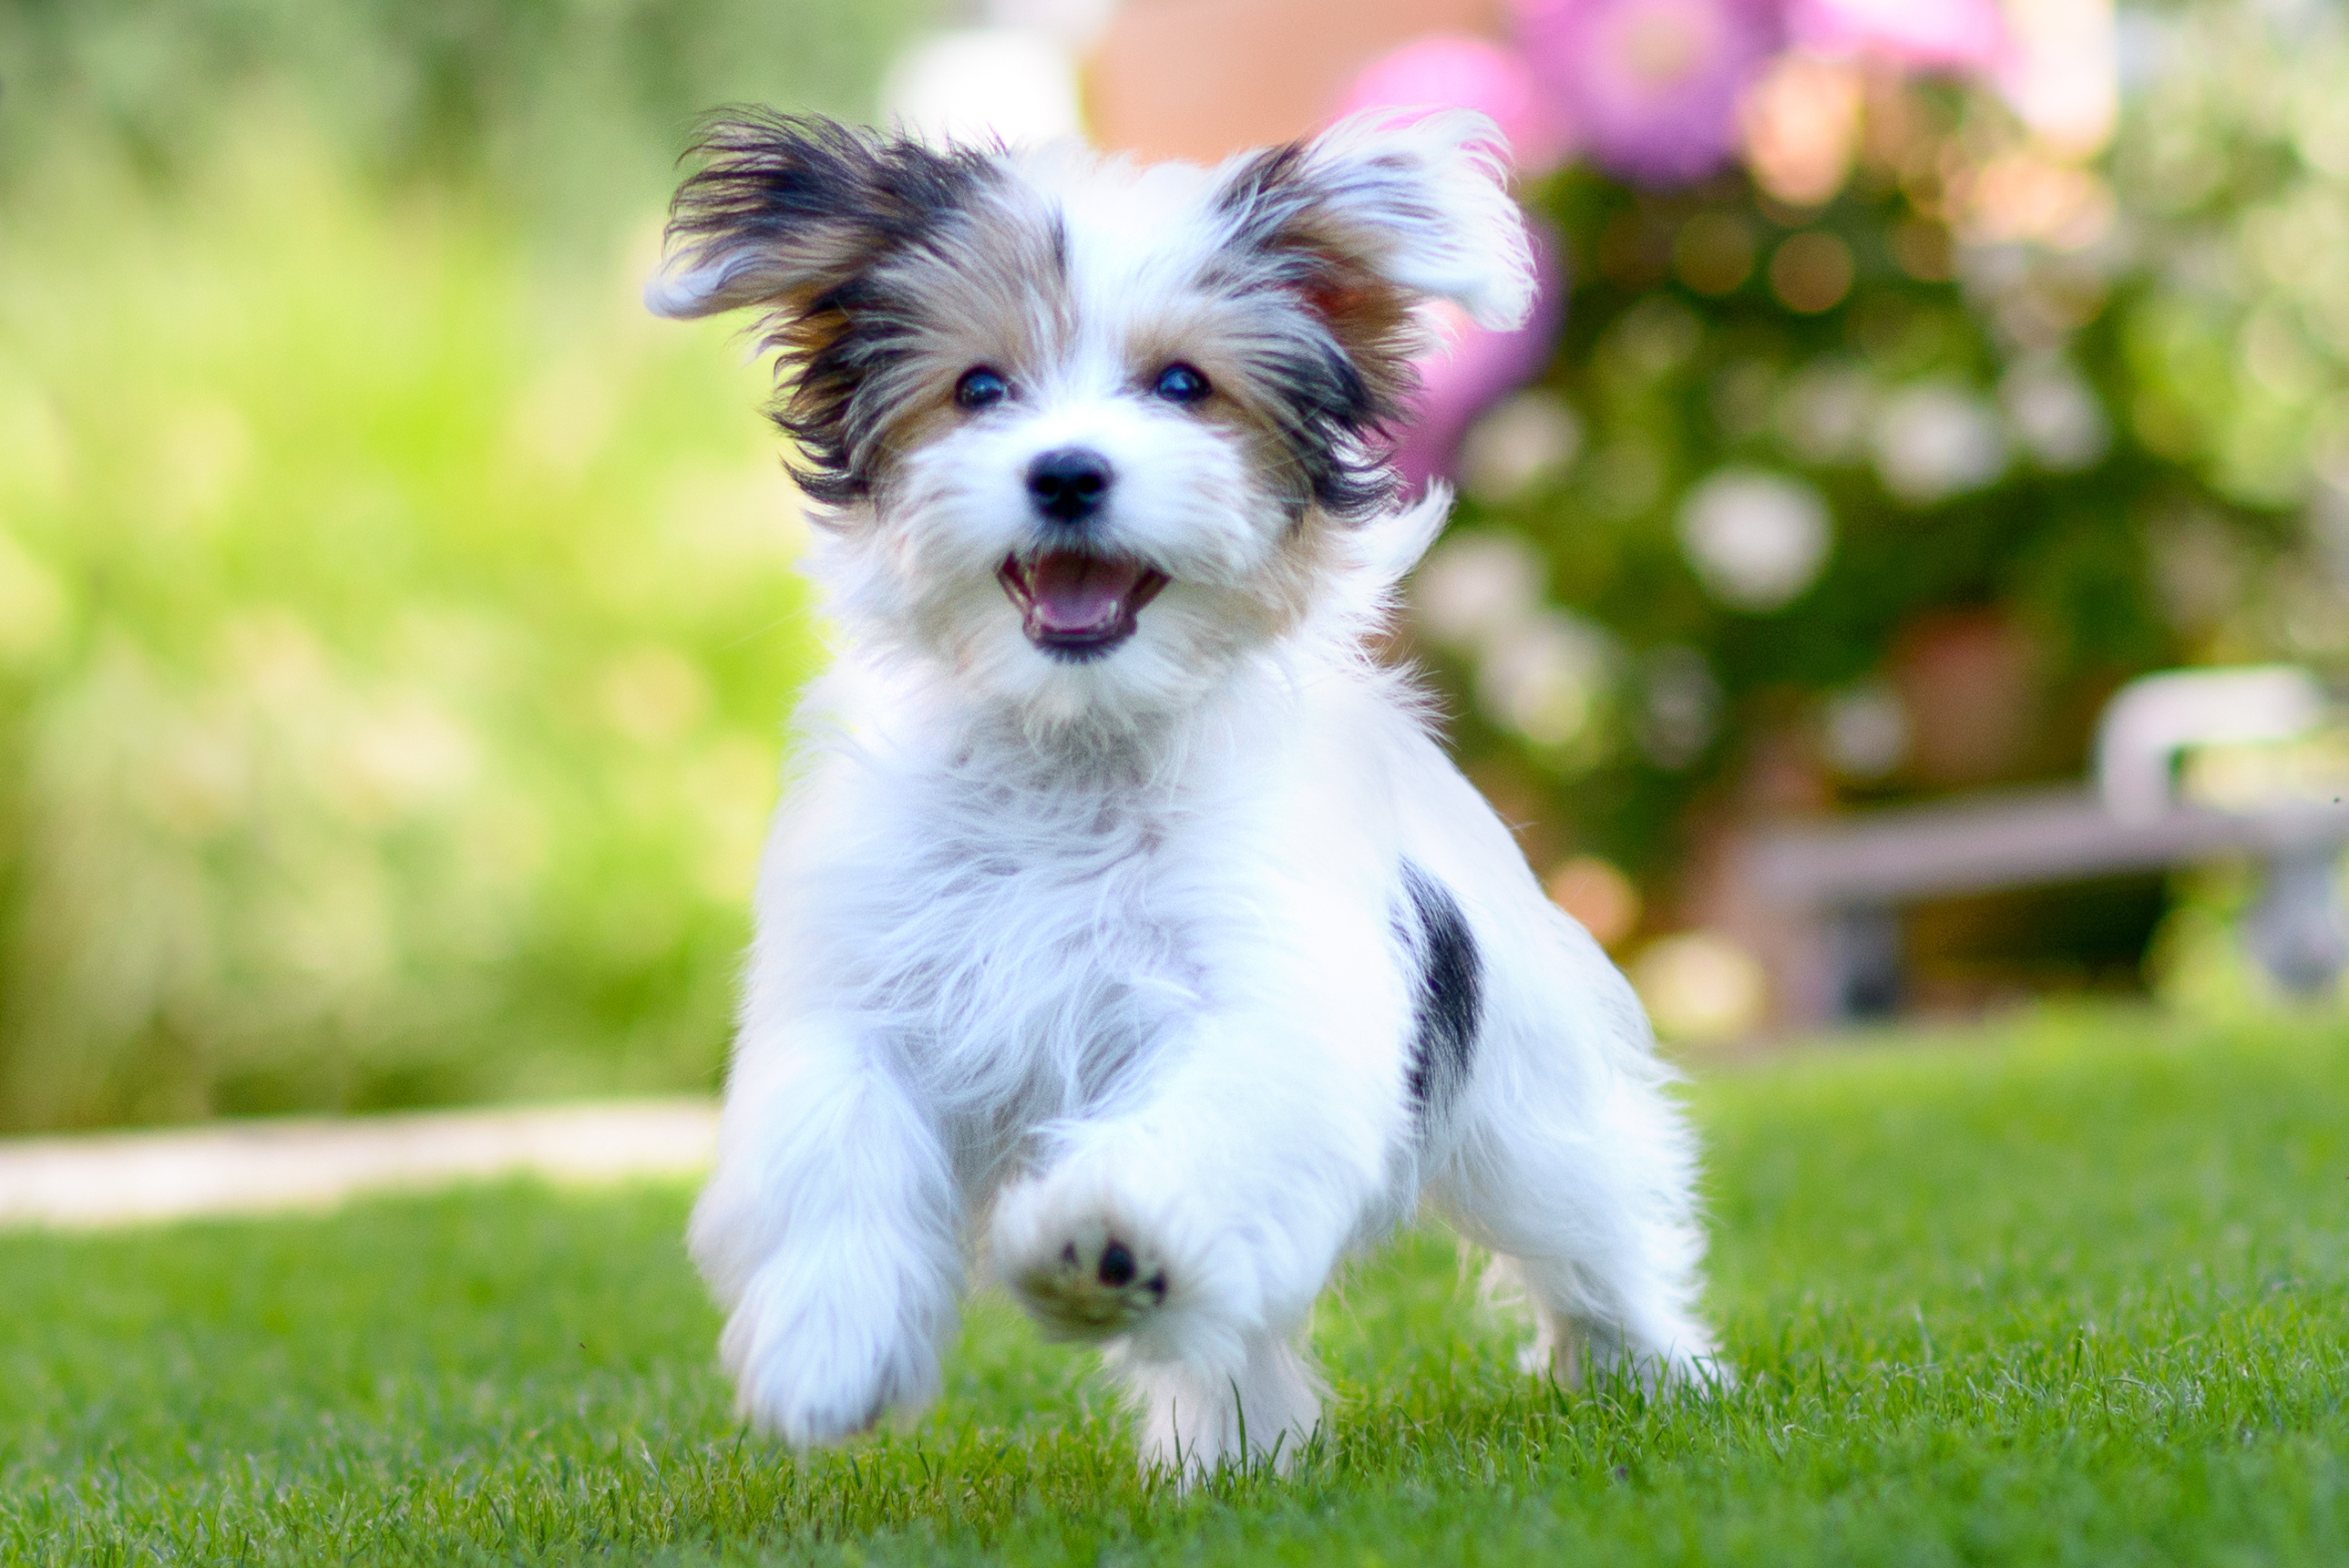 Havanese: The Smallest and Cutest Dog Breed in the World